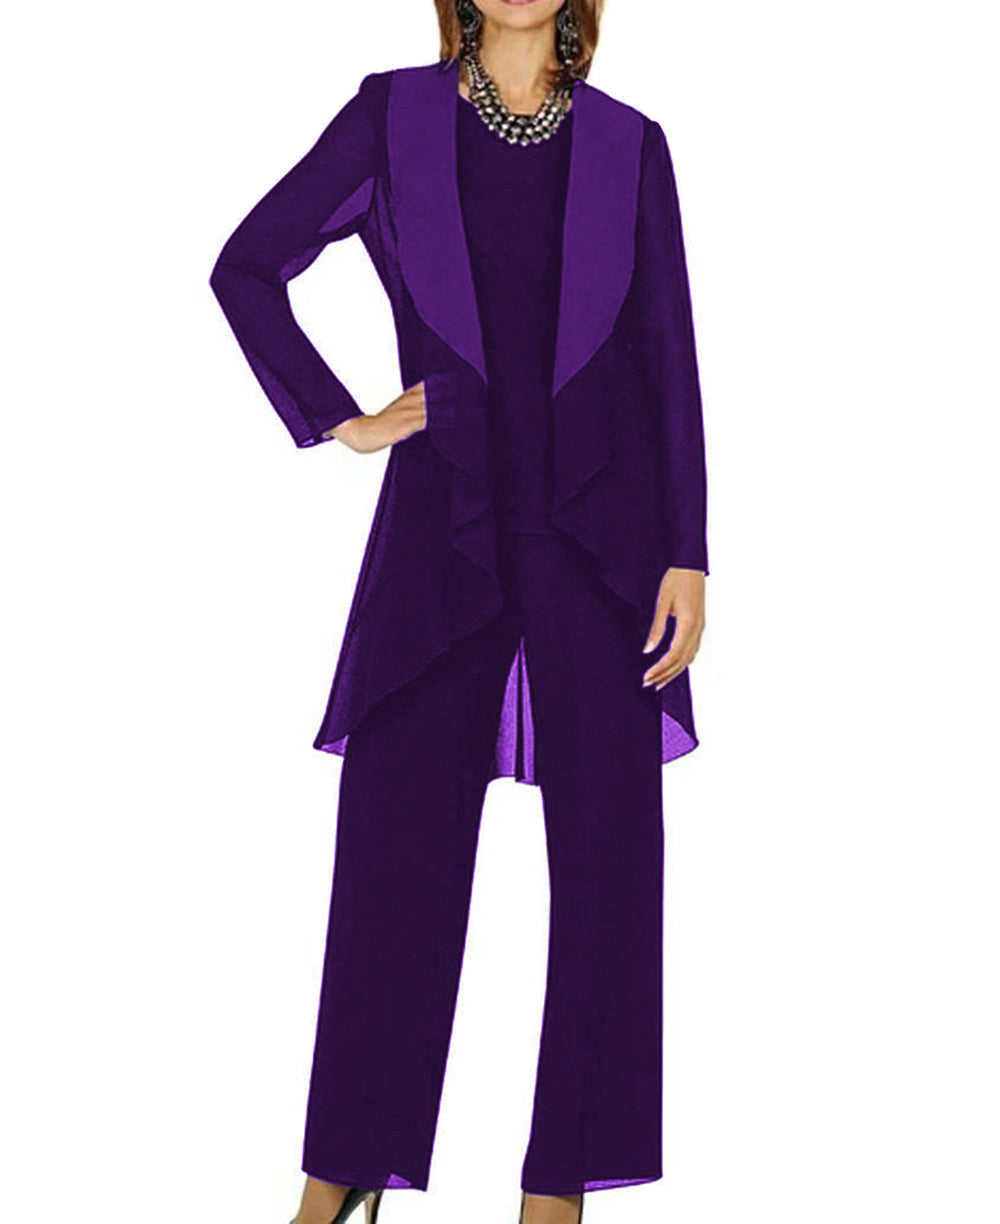 Violet Chiffon Mother of the Bride Dressy Outfits 3PCS pantsuits